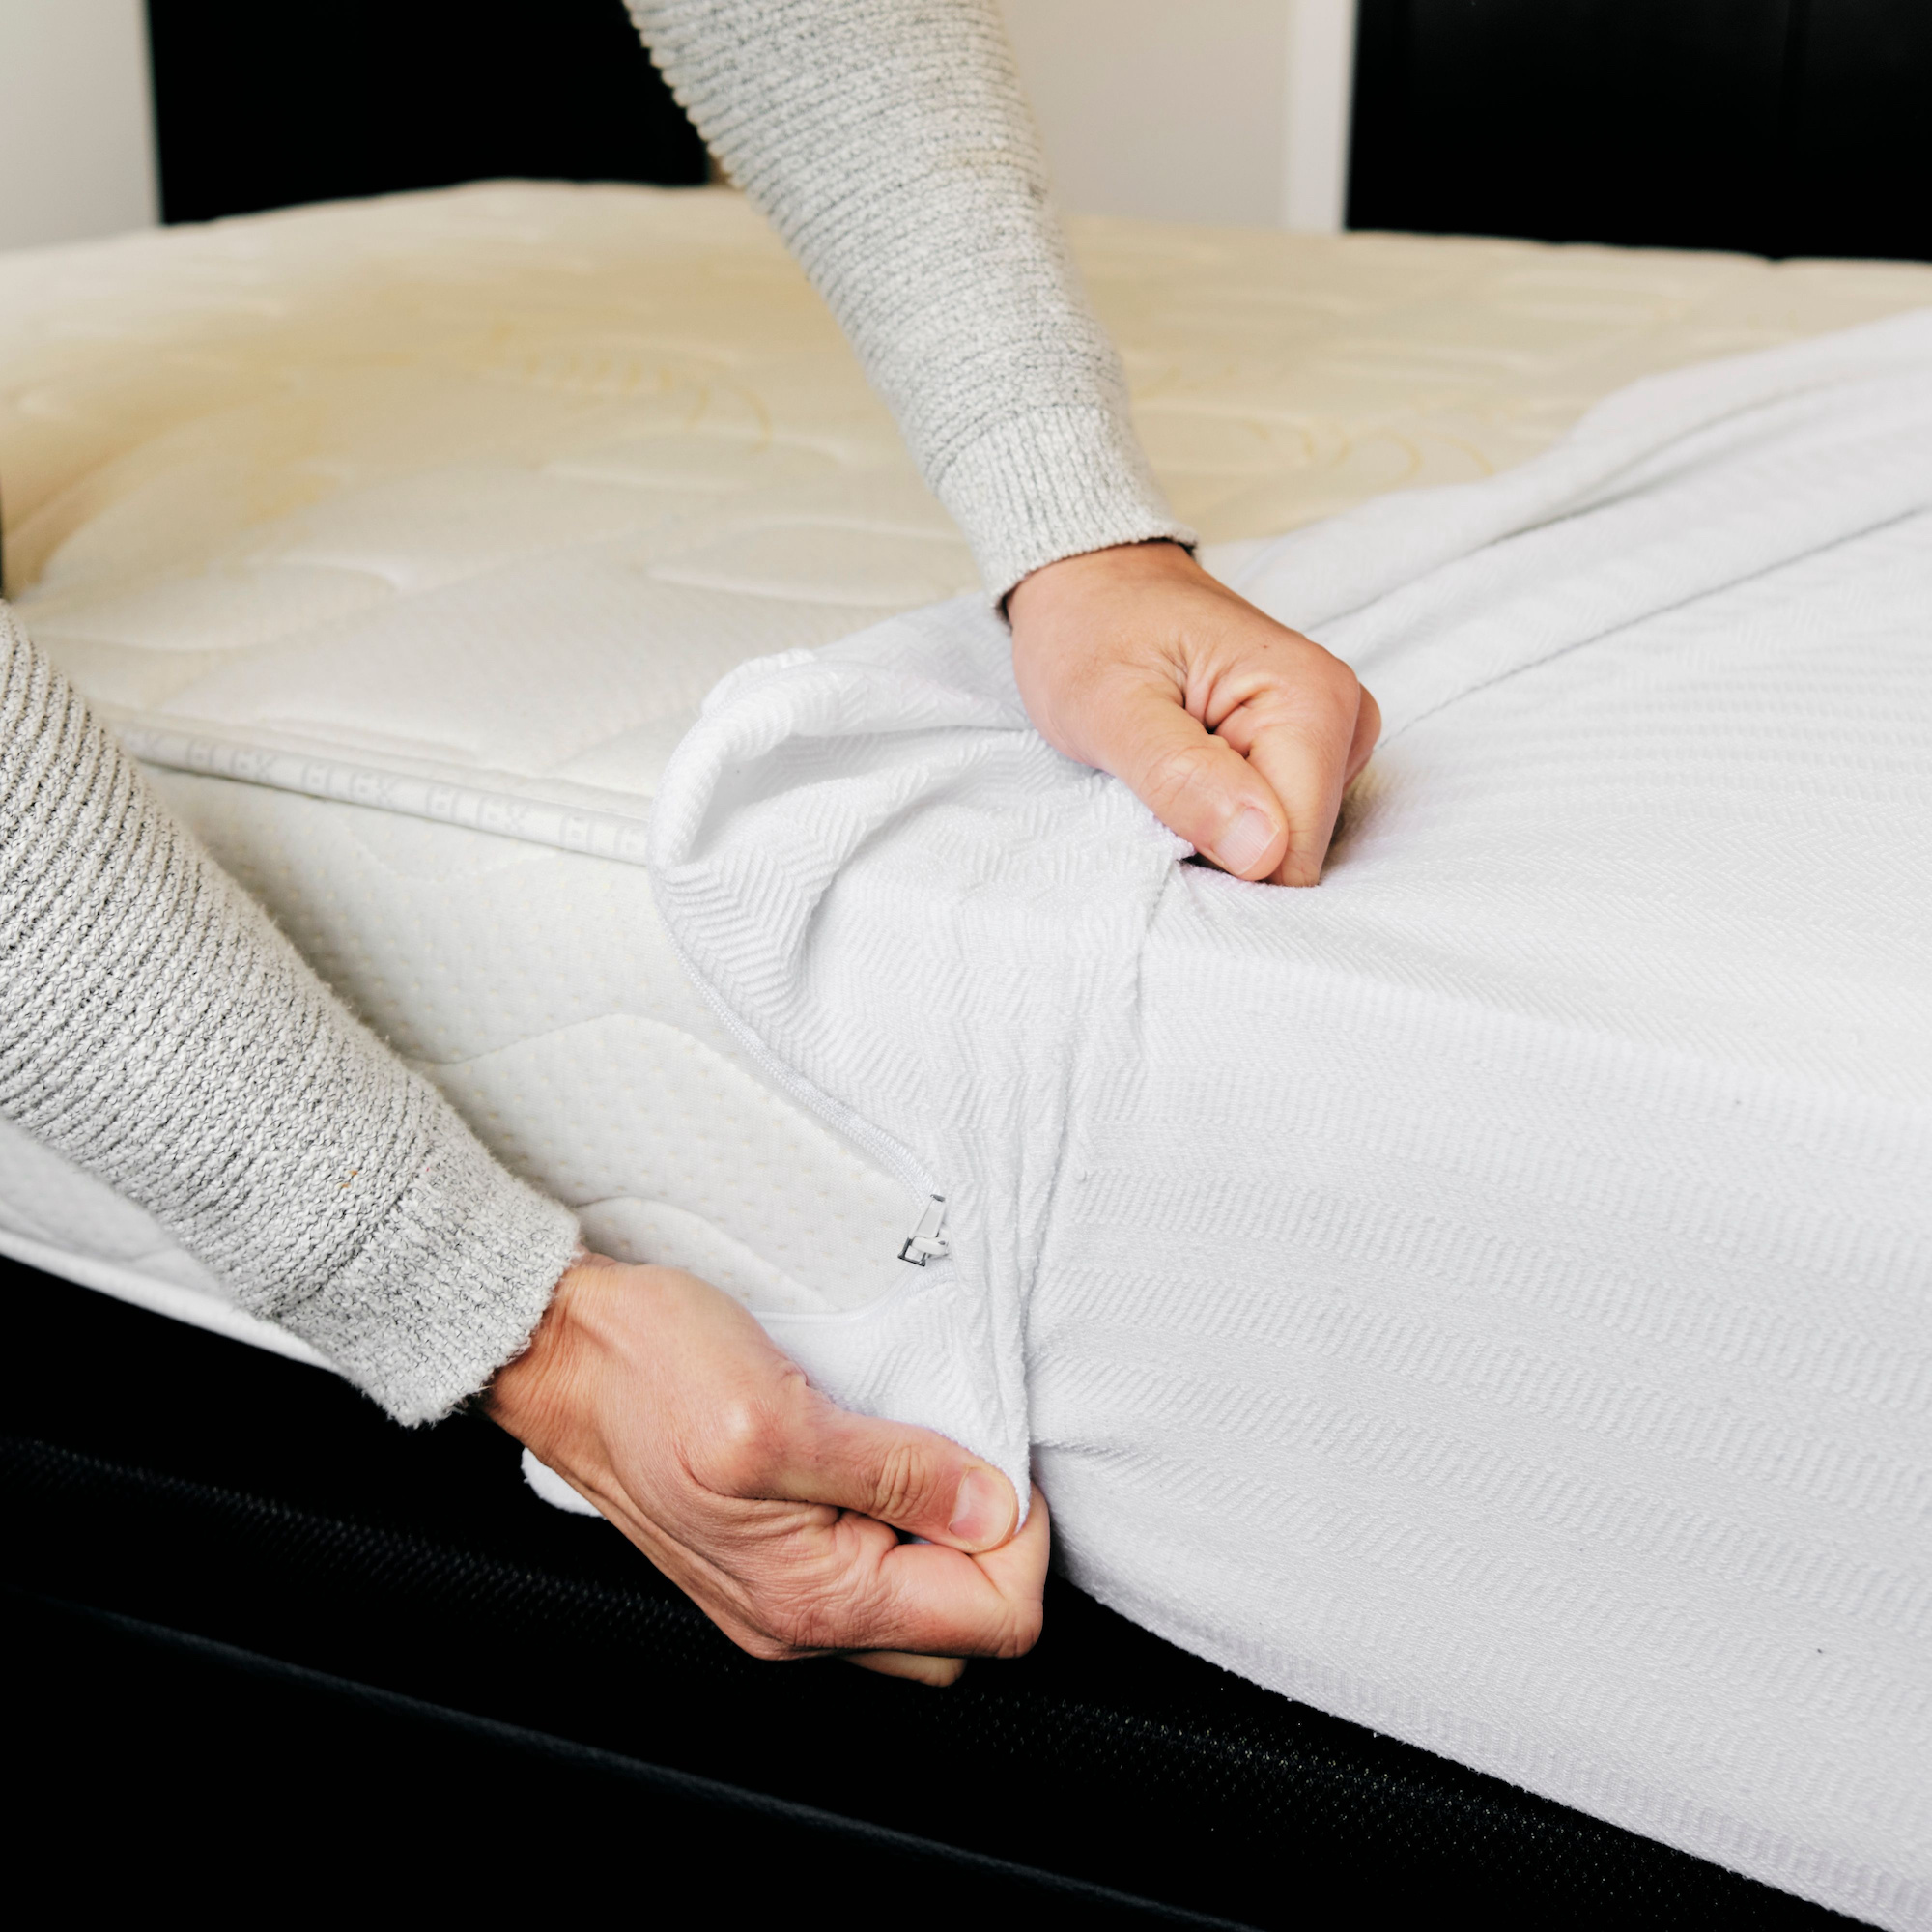 Mattress Protector: Benefits, Types & Facts